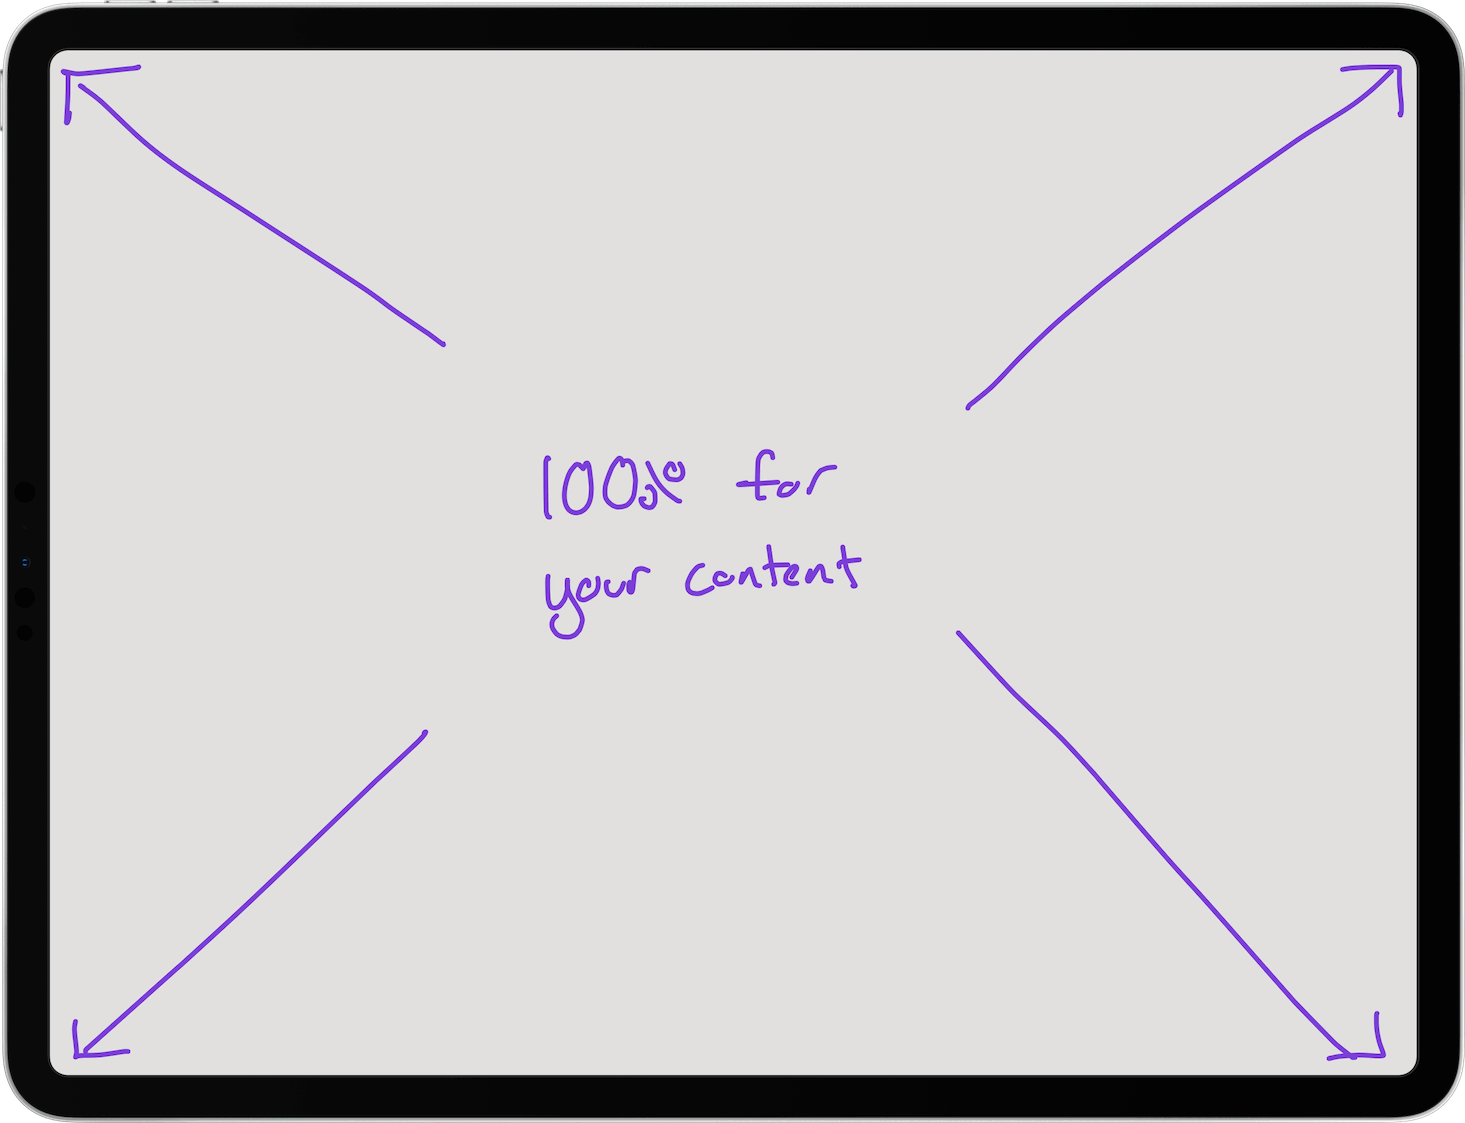 Muse uses 100% of the screen for your content